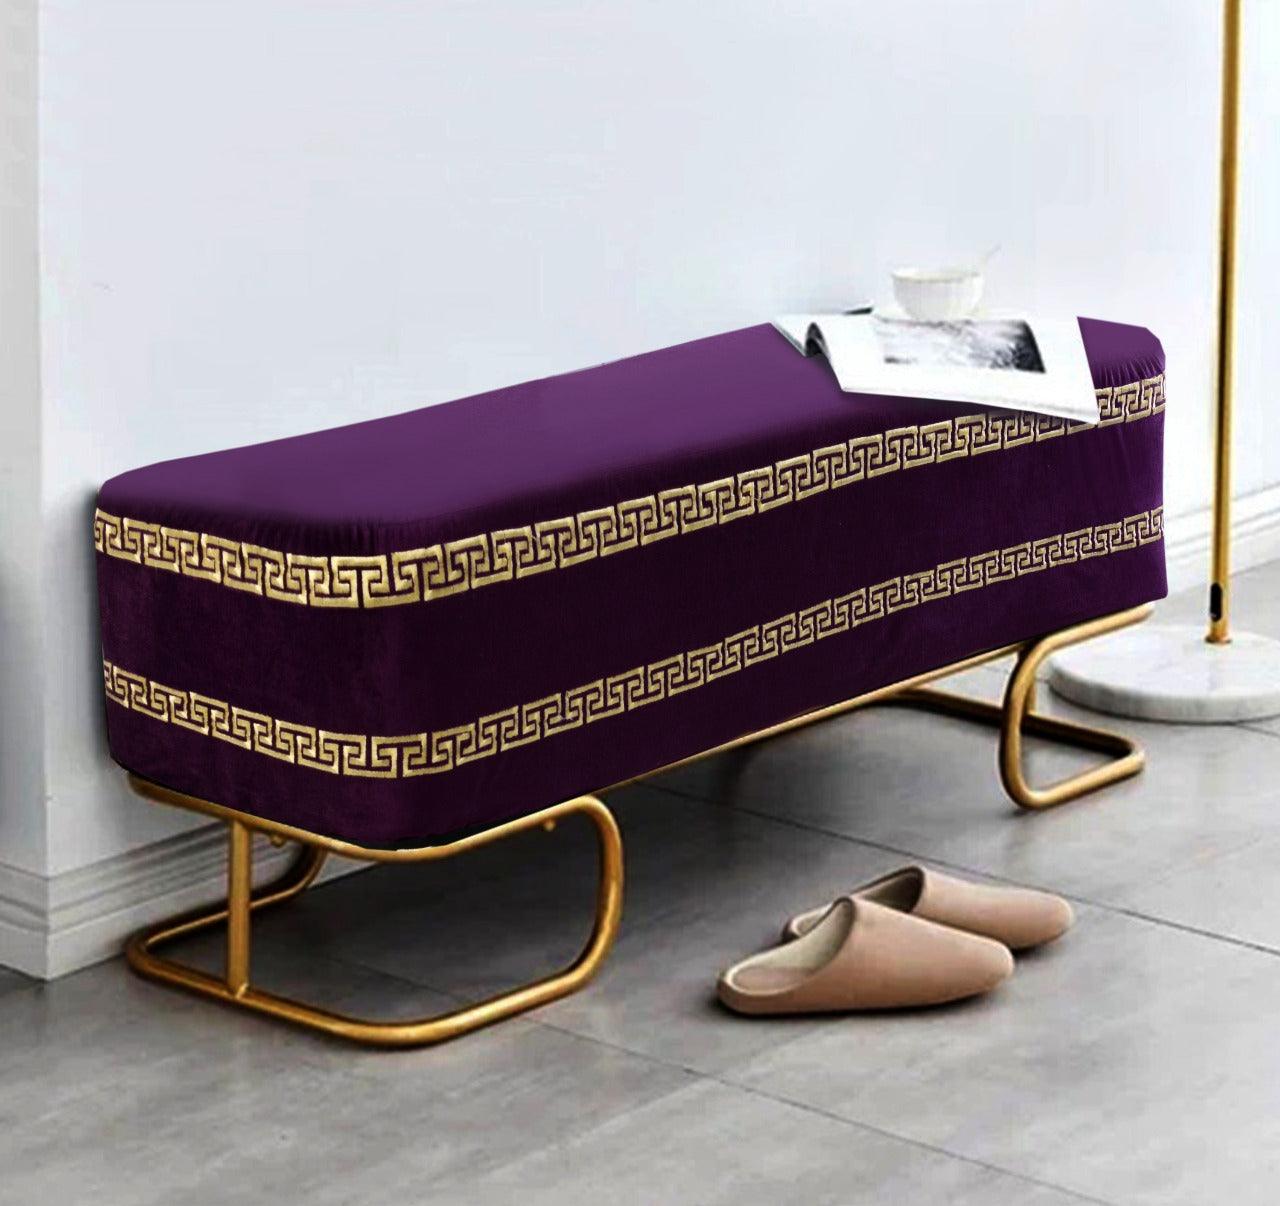 3 Seater Luxury Embroidered Wooden Stool With Steel Stand -715 - 92Bedding